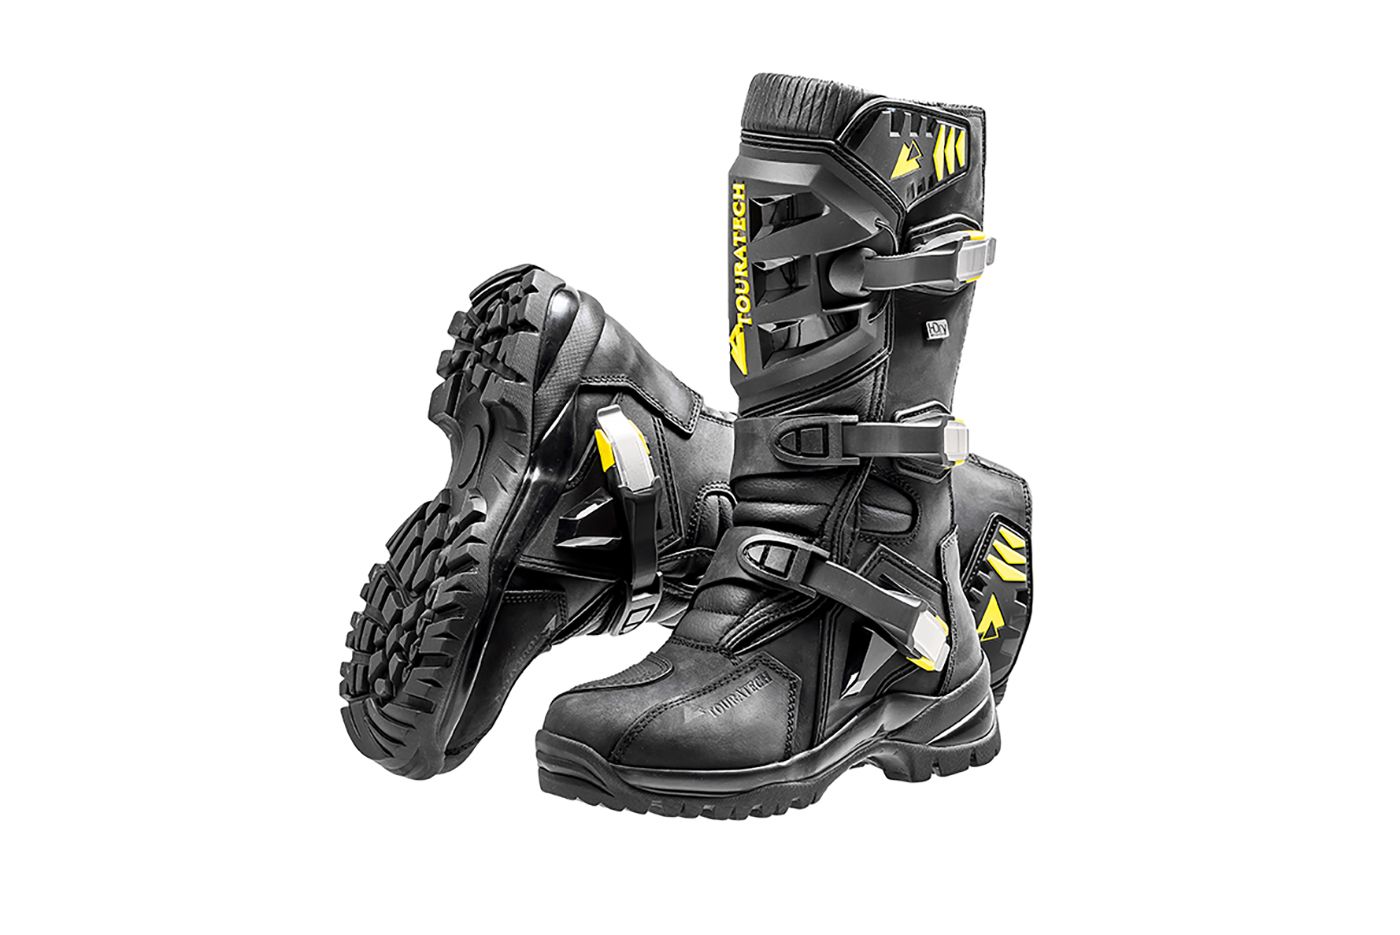 Boots Touratech DESTINO Touring 2 HDryBoots Touratech DESTINO Touring 2 HDry